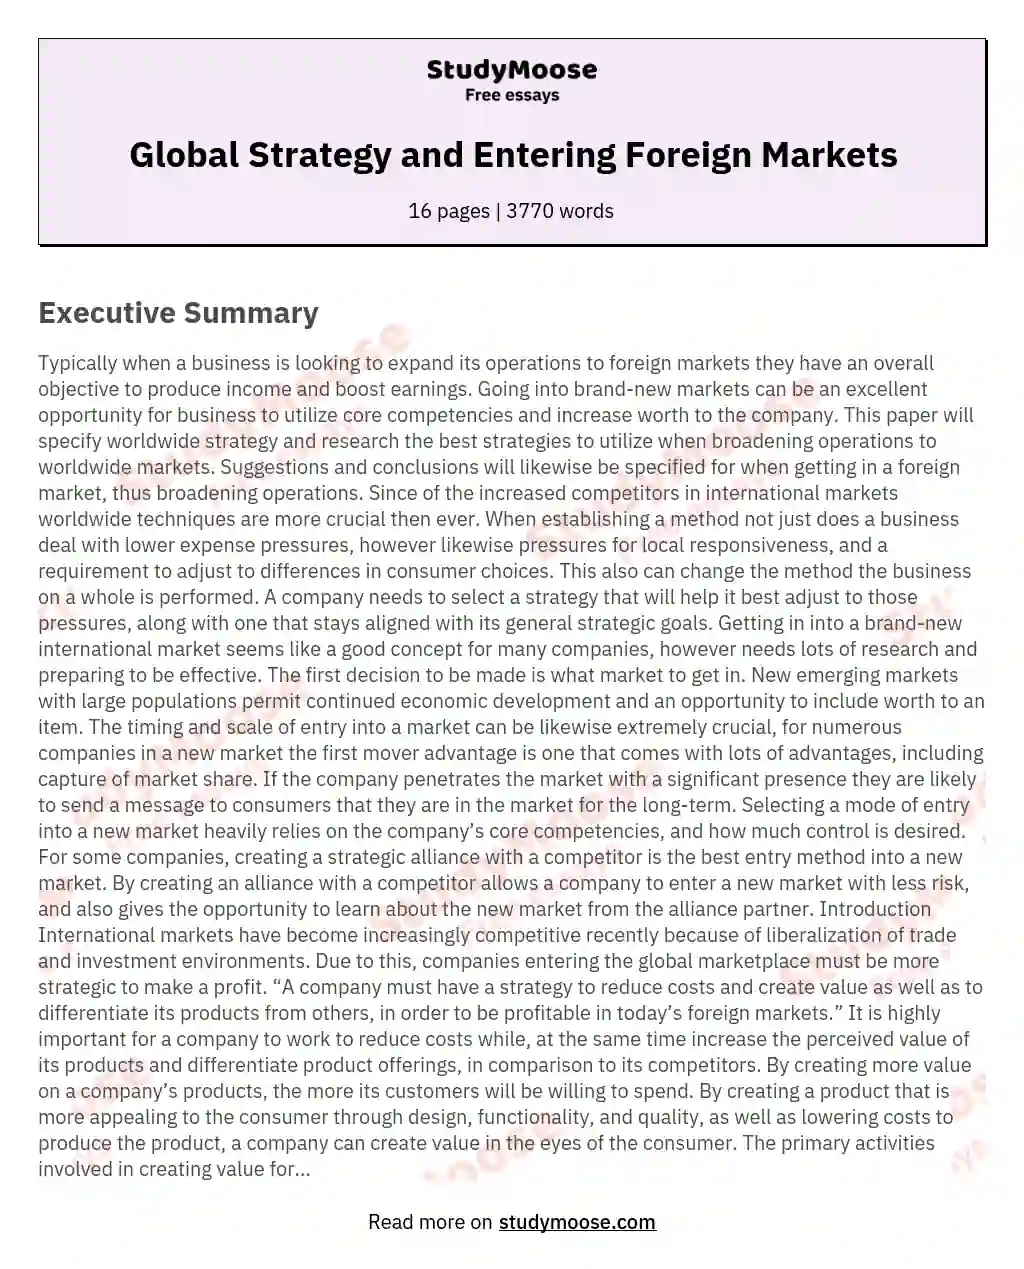 Global Strategy and Entering Foreign Markets essay